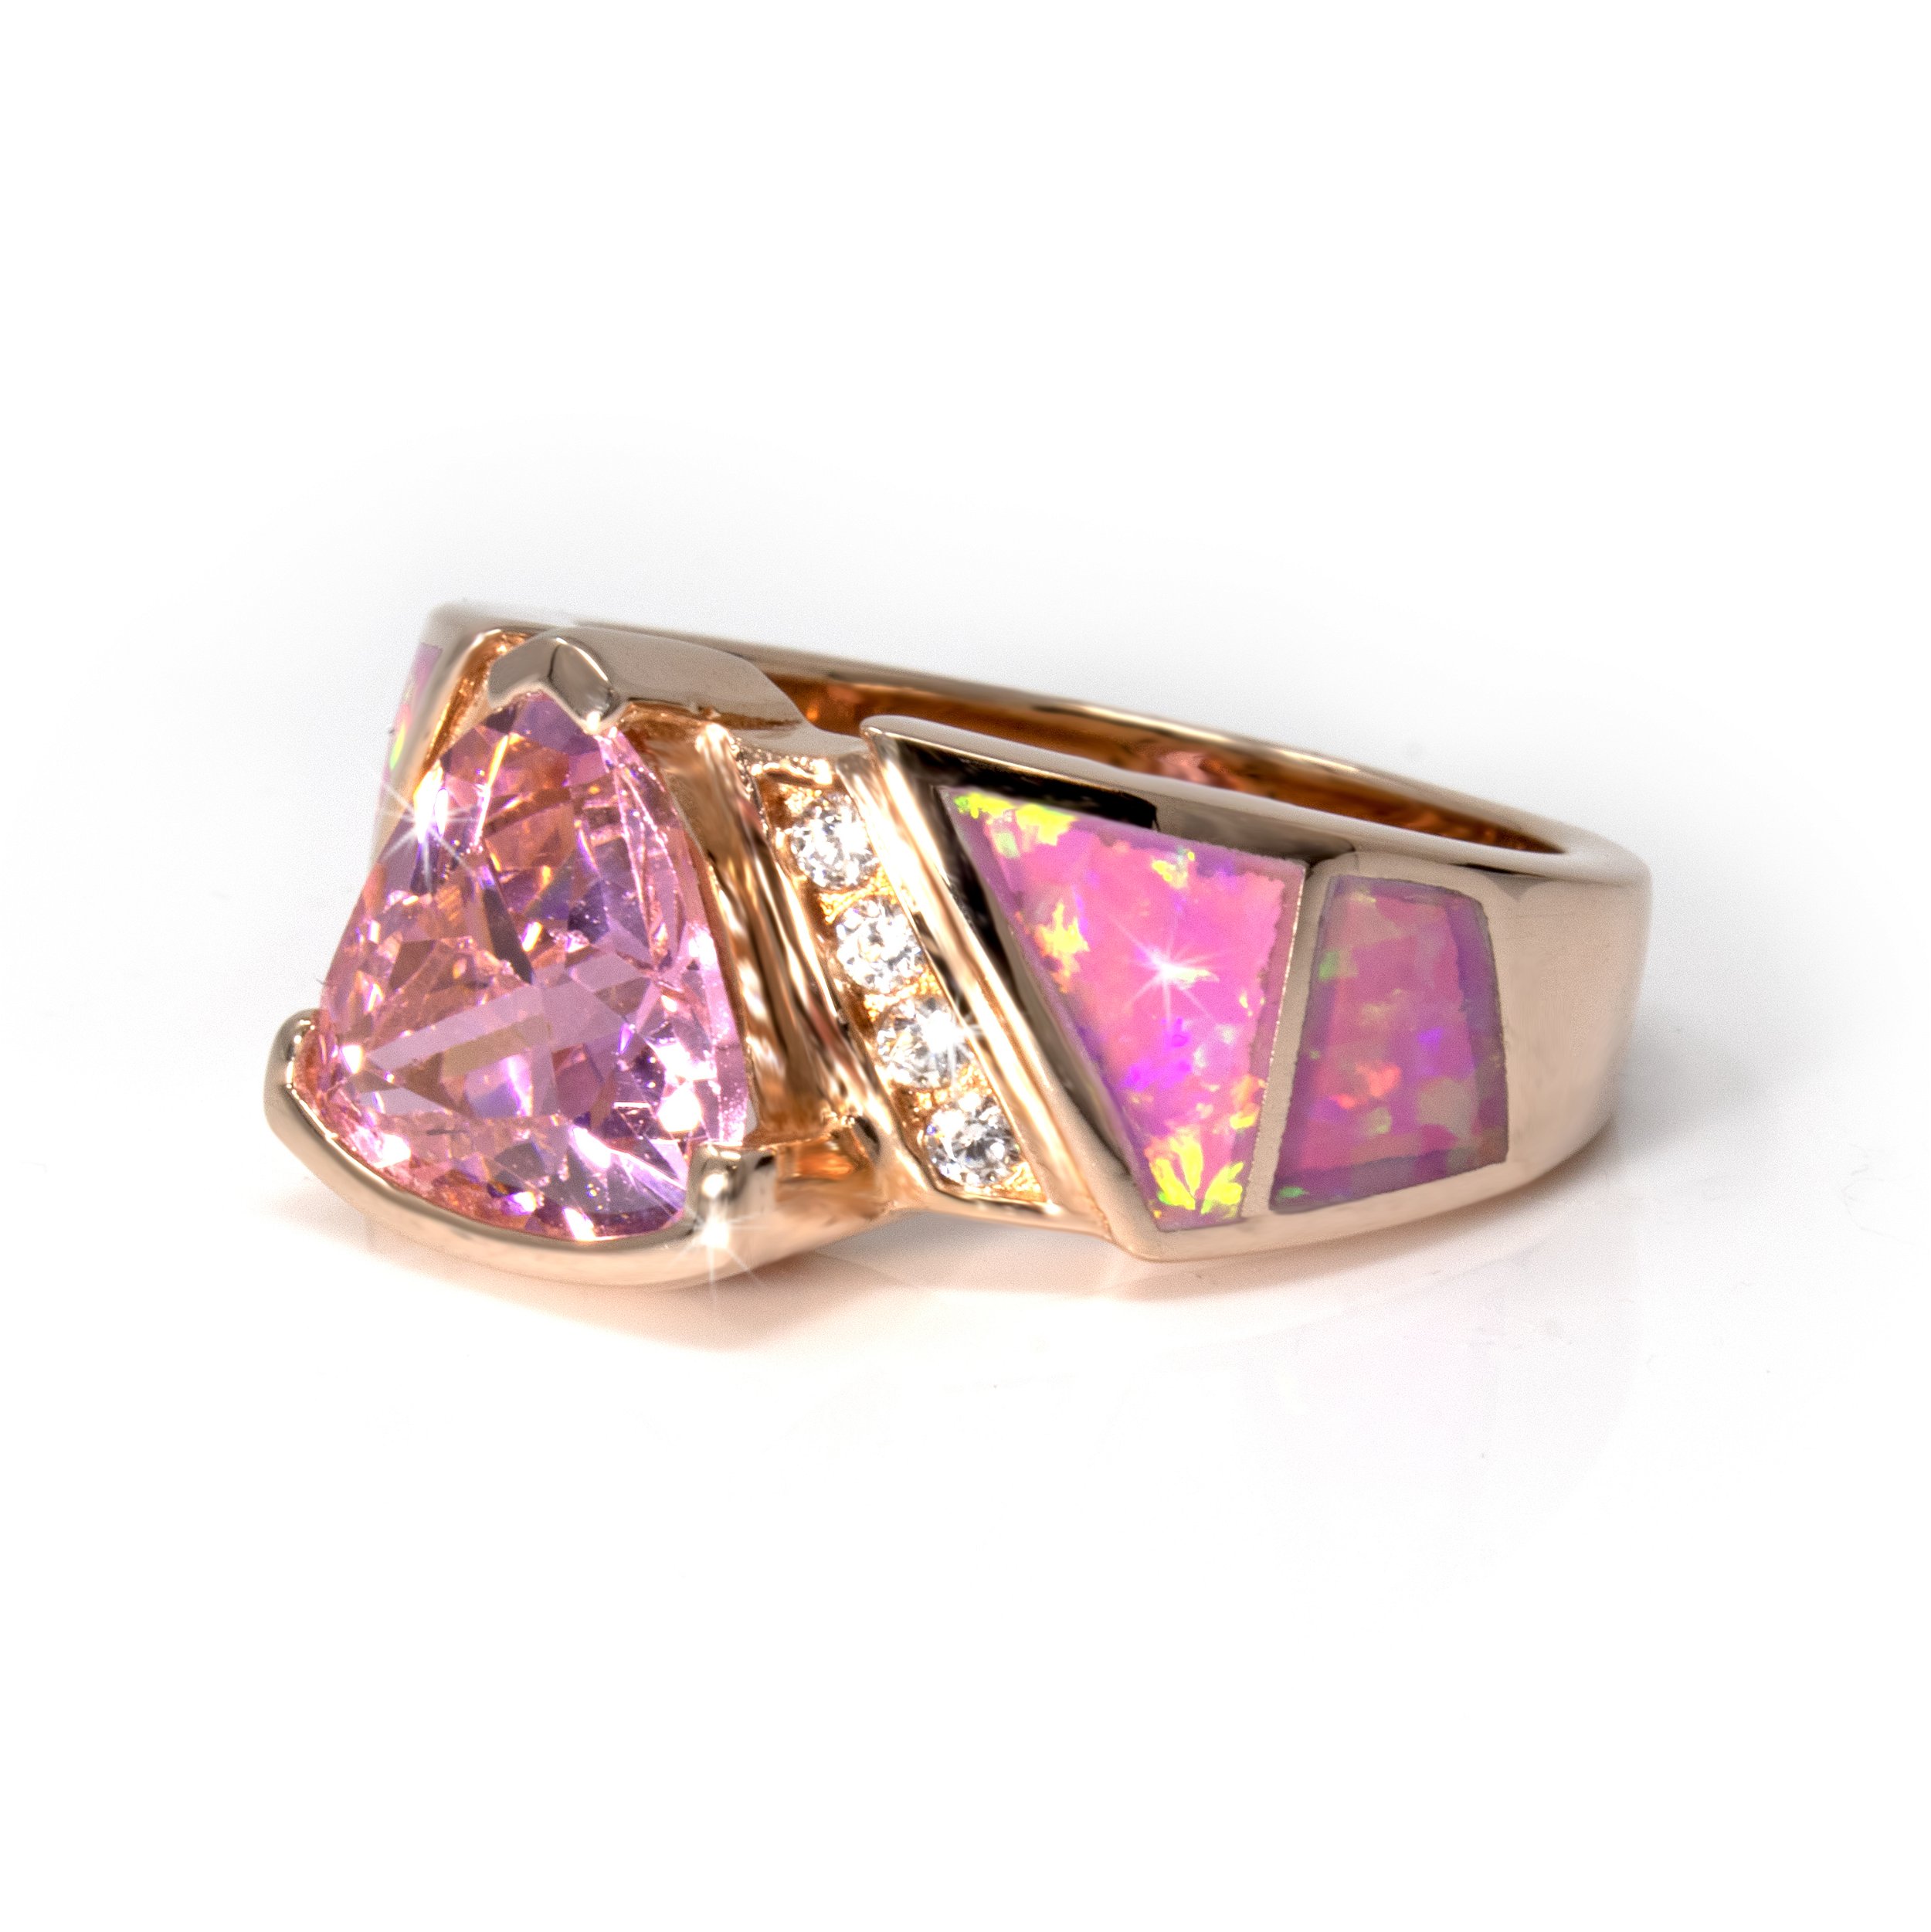 Pink Opal Ring with Rose Gold Overlay Size 10 - Inlaid Top Band With Amethyst Cz Trillion Set In Raised Sterling Silver Half Bezel & 2 White Cz Trios On Side